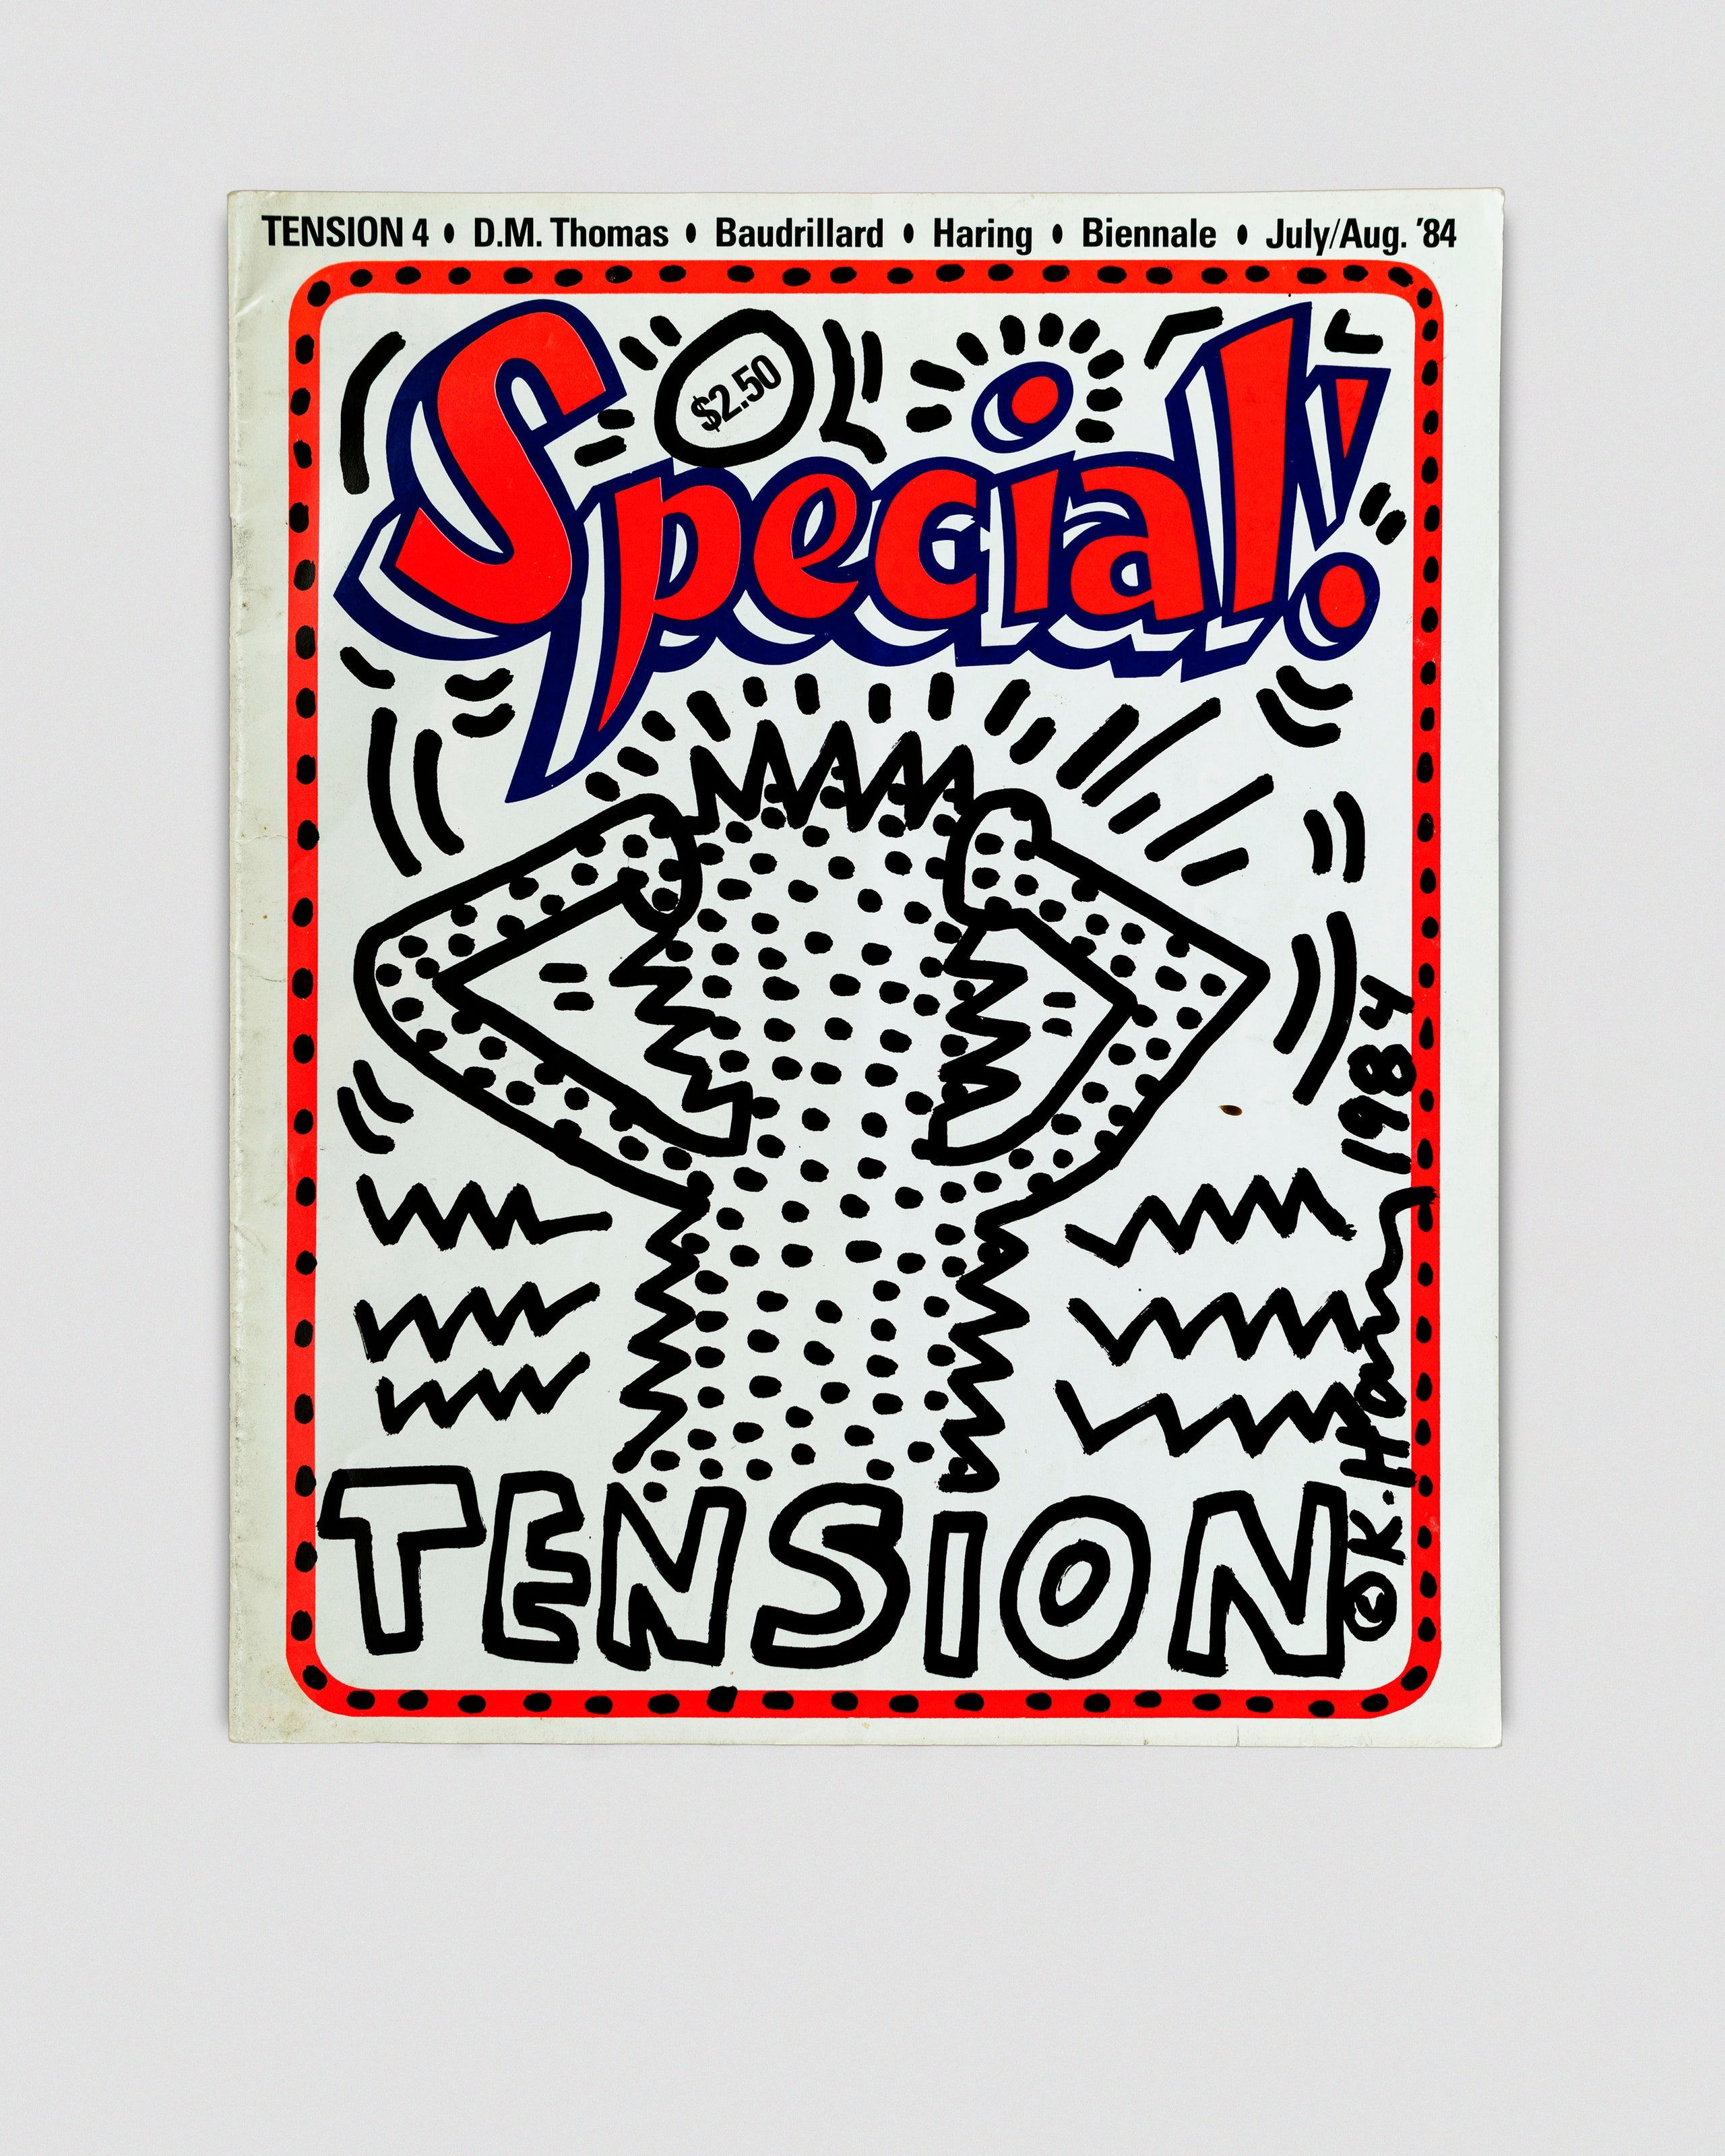 Tension Magazine Issue #4: Keith Haring Special